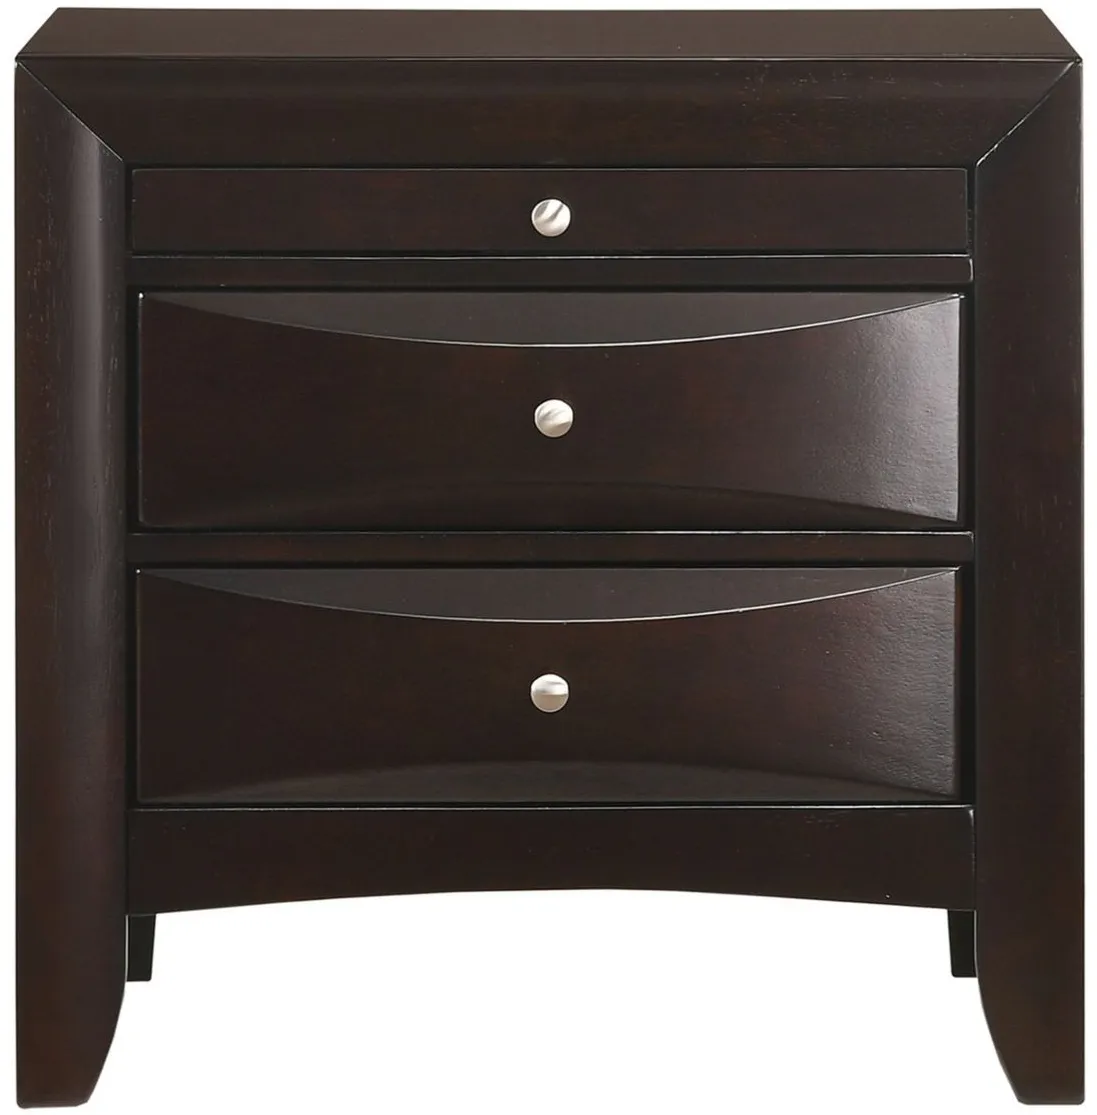 Madison 2 Drawer Nightstand in Mahogany by Elements International Group